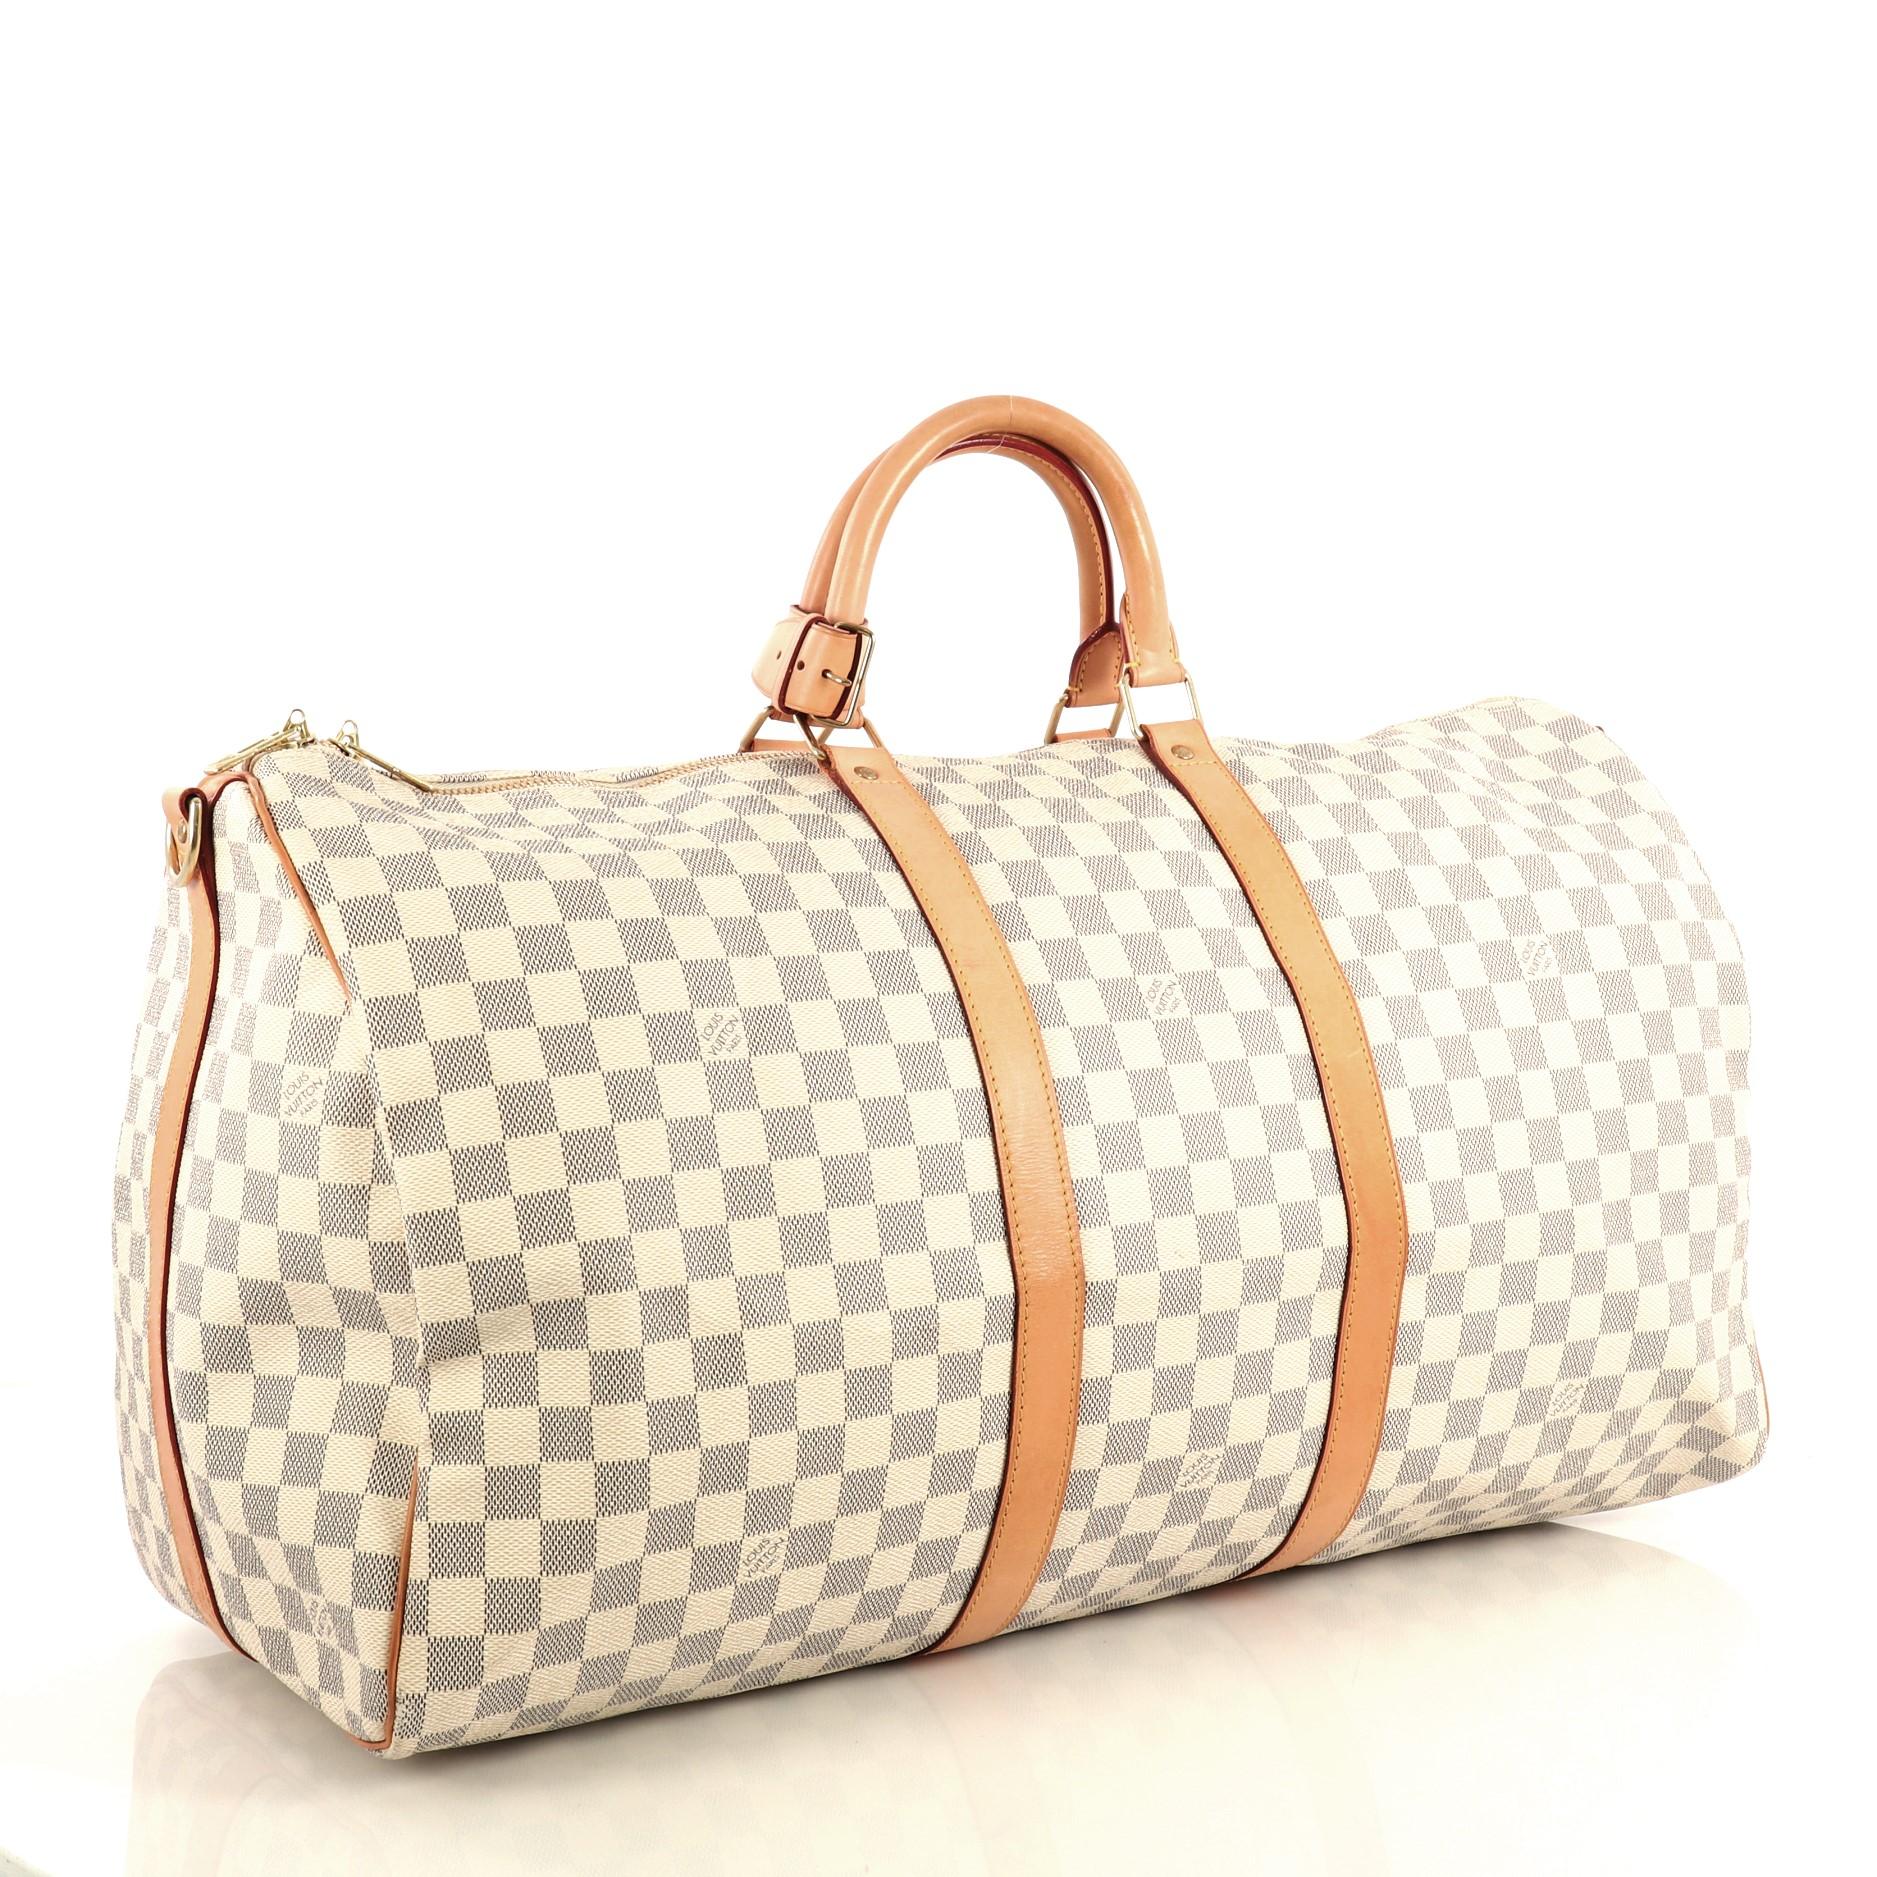 This Louis Vuitton Keepall Bandouliere Bag Damier 55, crafted with damier azur coated canvas, features dual rolled handles, leather trim, and gold-tone hardware. Its zip closure opens to a neutral fabric interior. Authenticity code reads: MB0047.